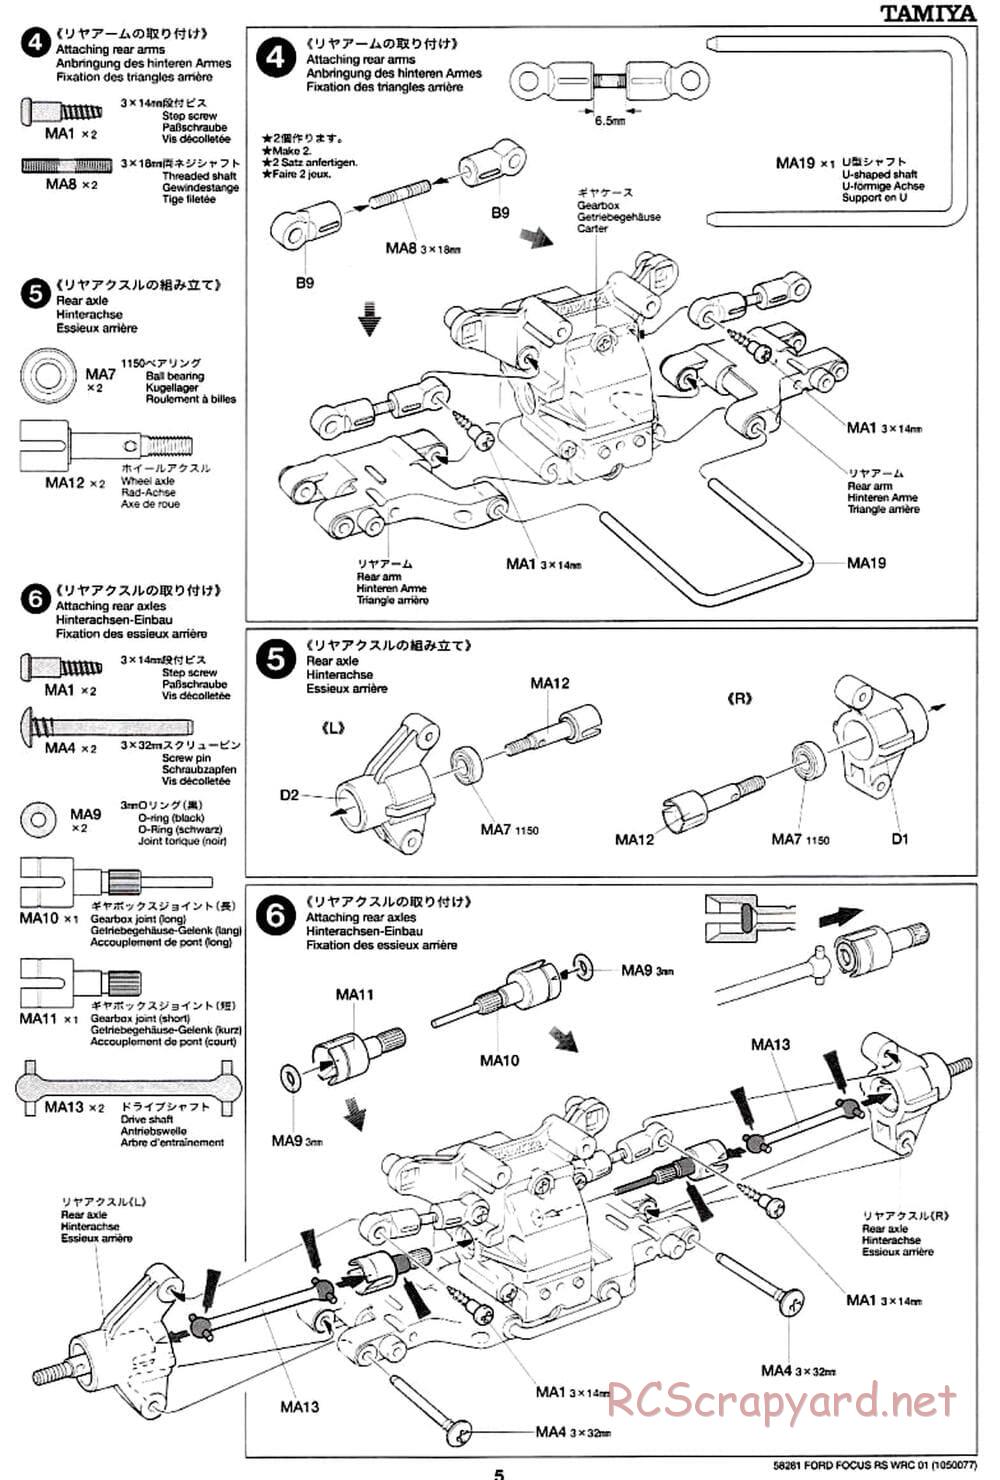 Tamiya - Ford Focus RS WRC 01 - TB-01 Chassis - Manual - Page 5